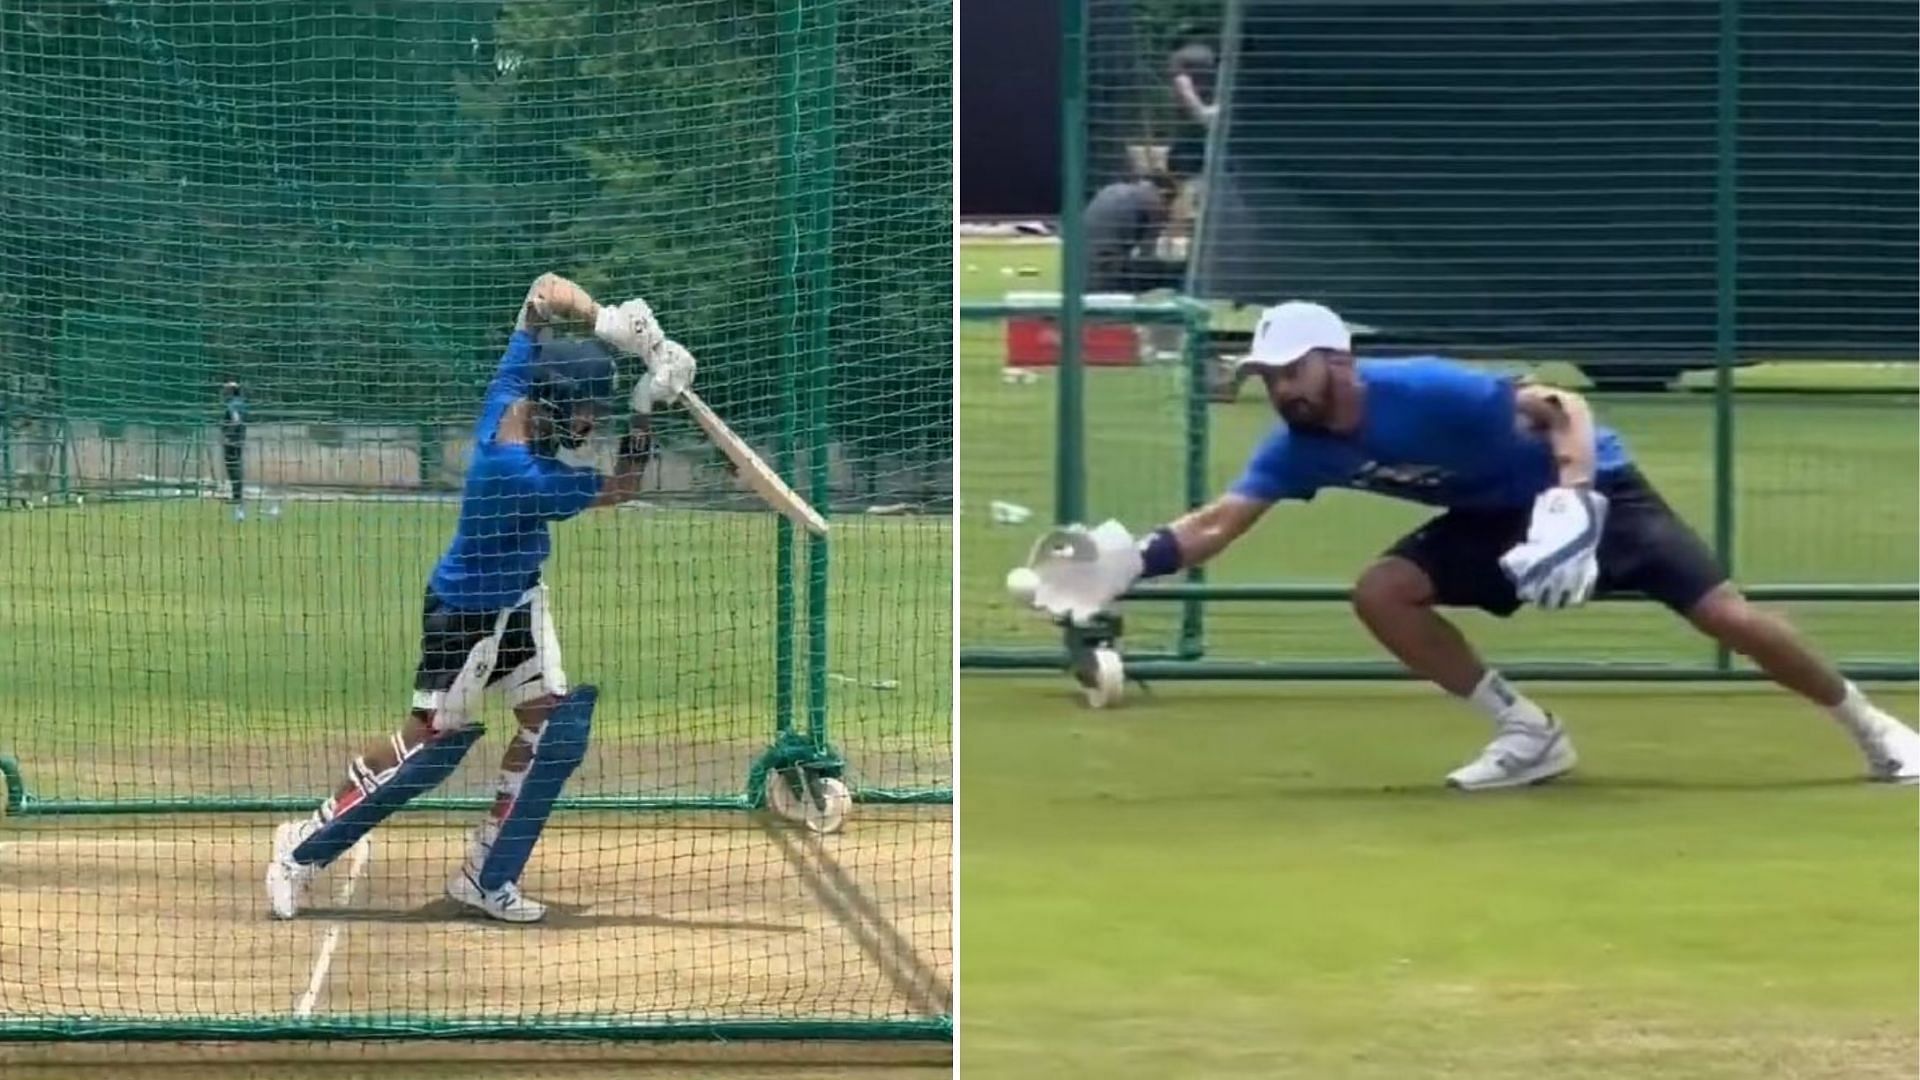 KL Rahul had posted an Instagram reel of him practicing in the nets and doing his keeping drills